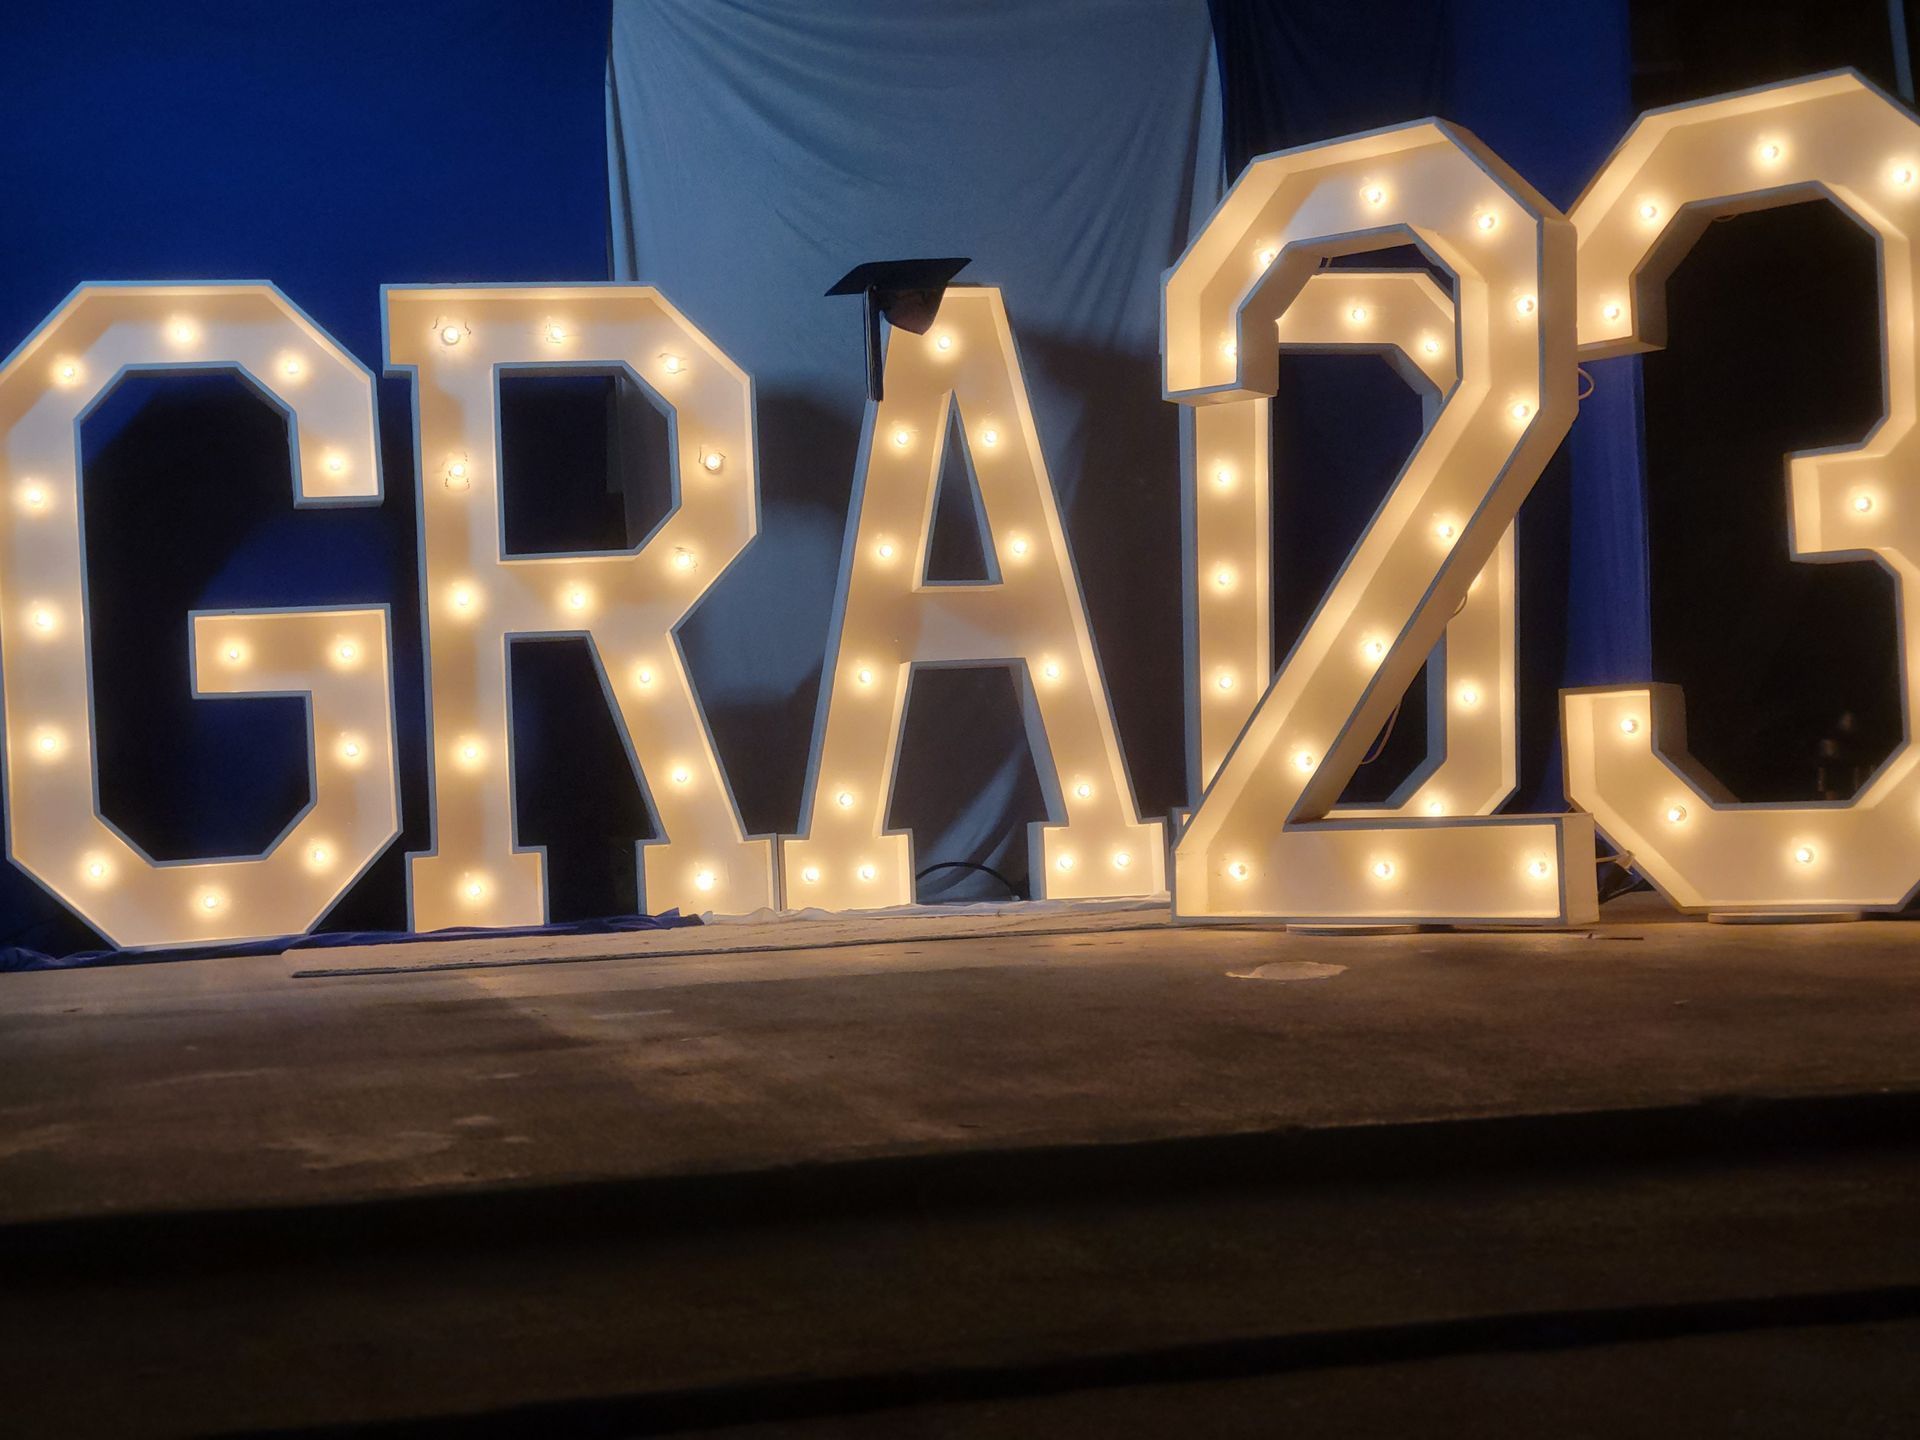 the letters graz are lit up in the dark